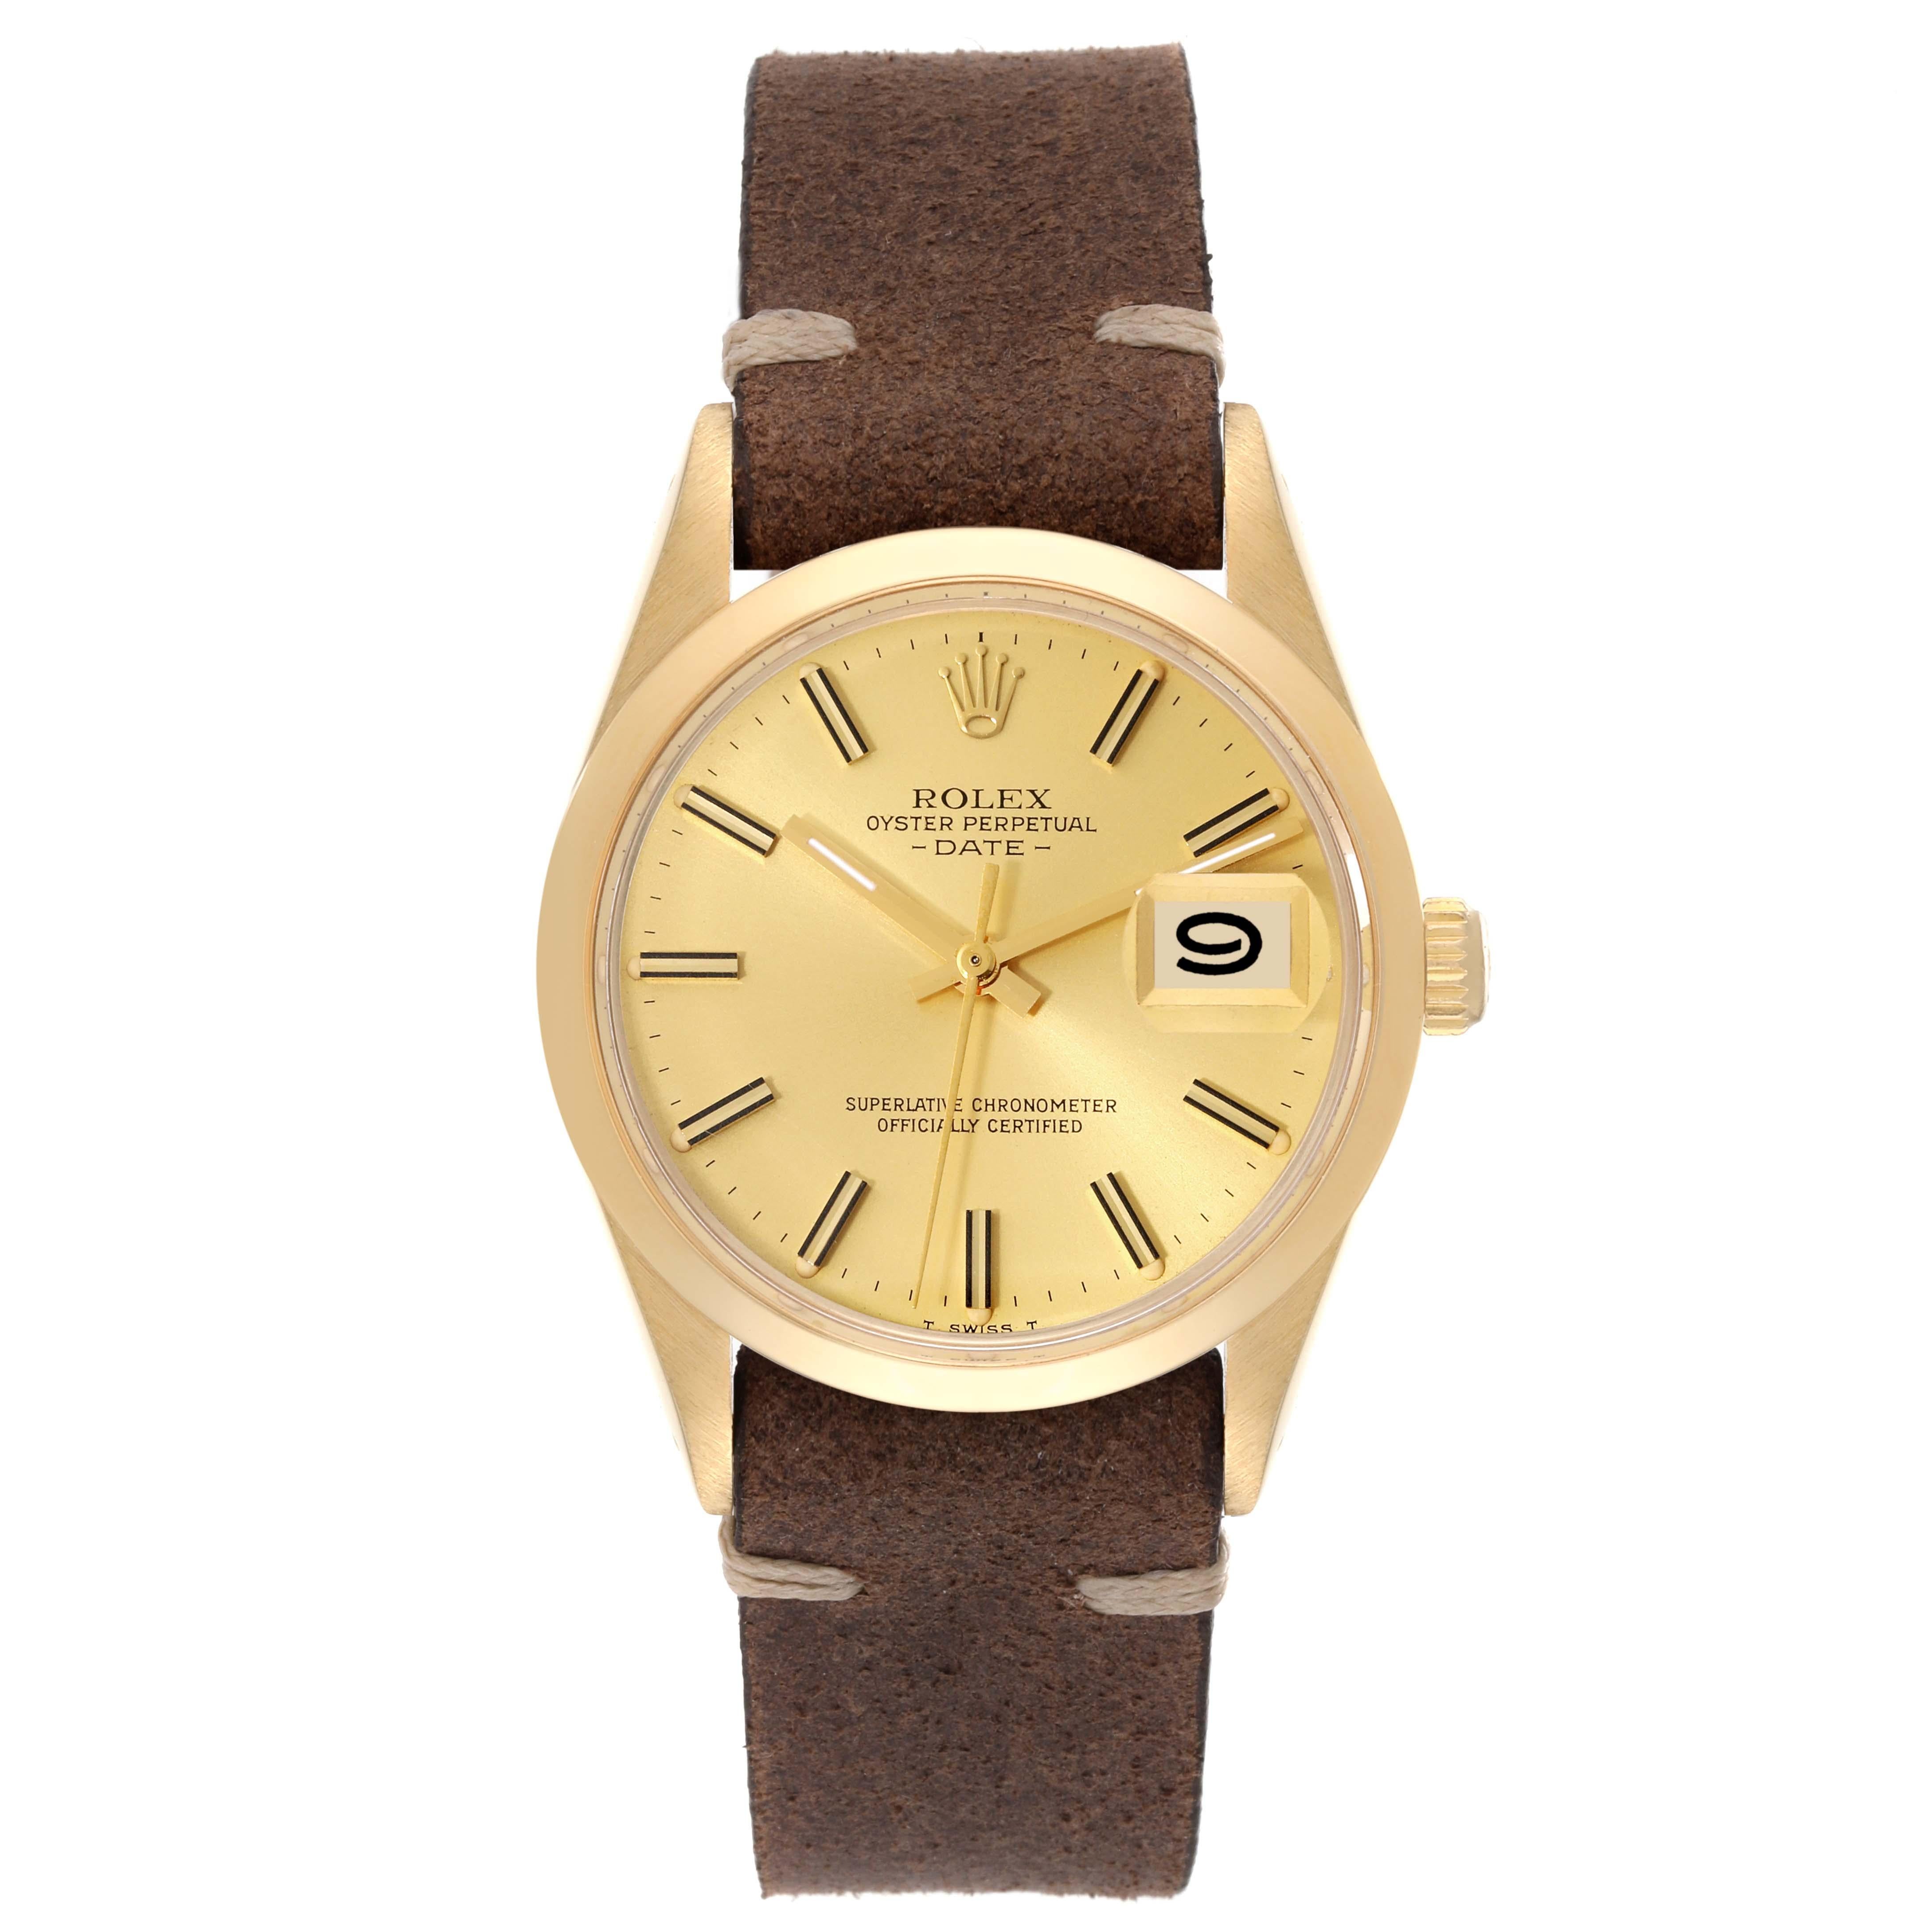 Rolex Date Yellow Gold Champagne Dial Leather Strap Vintage Mens Watch 15007. Officially certified chronometer self-winding movement. 14k yellow gold case 34.0 mm in diameter. Rolex logo on the crown. 14k yellow gold smooth bezel. Acrylic crystal